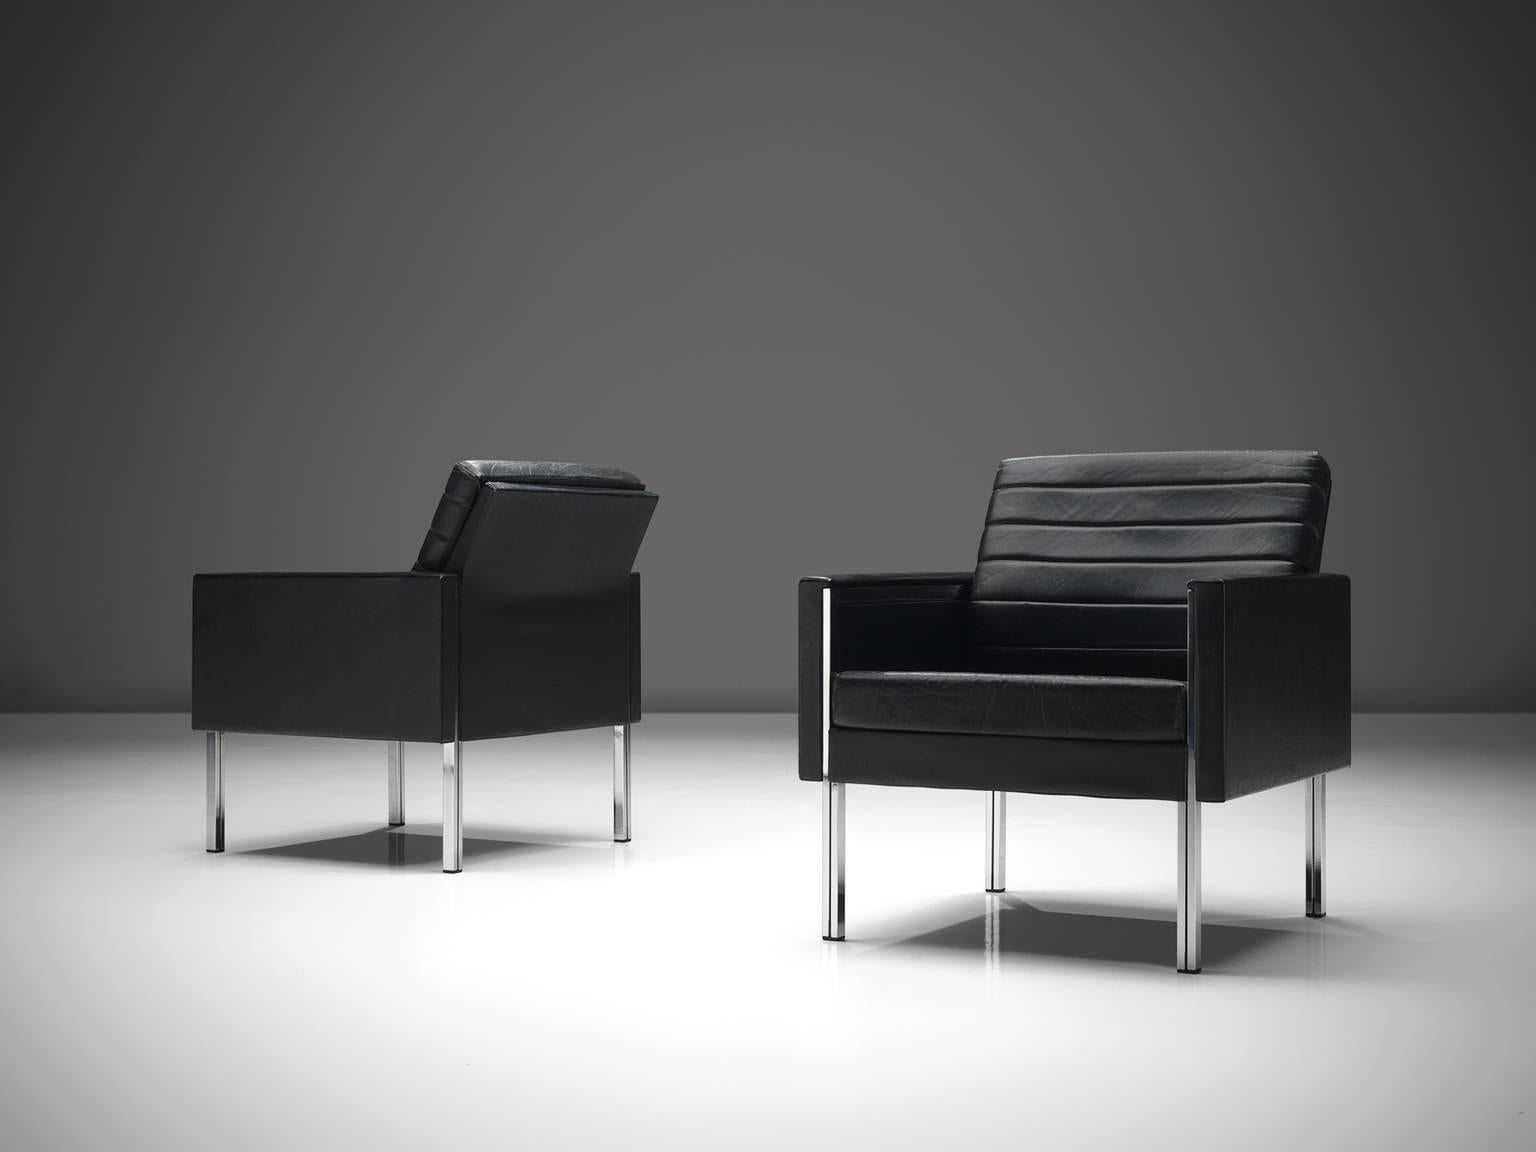 Black leather and steel, Europe, 1960s. 

These comfortable chairs shows elegant steel details that run all the way to the top of the armrests. The combination of steel and the black leather upholstery give these chairs their modern and